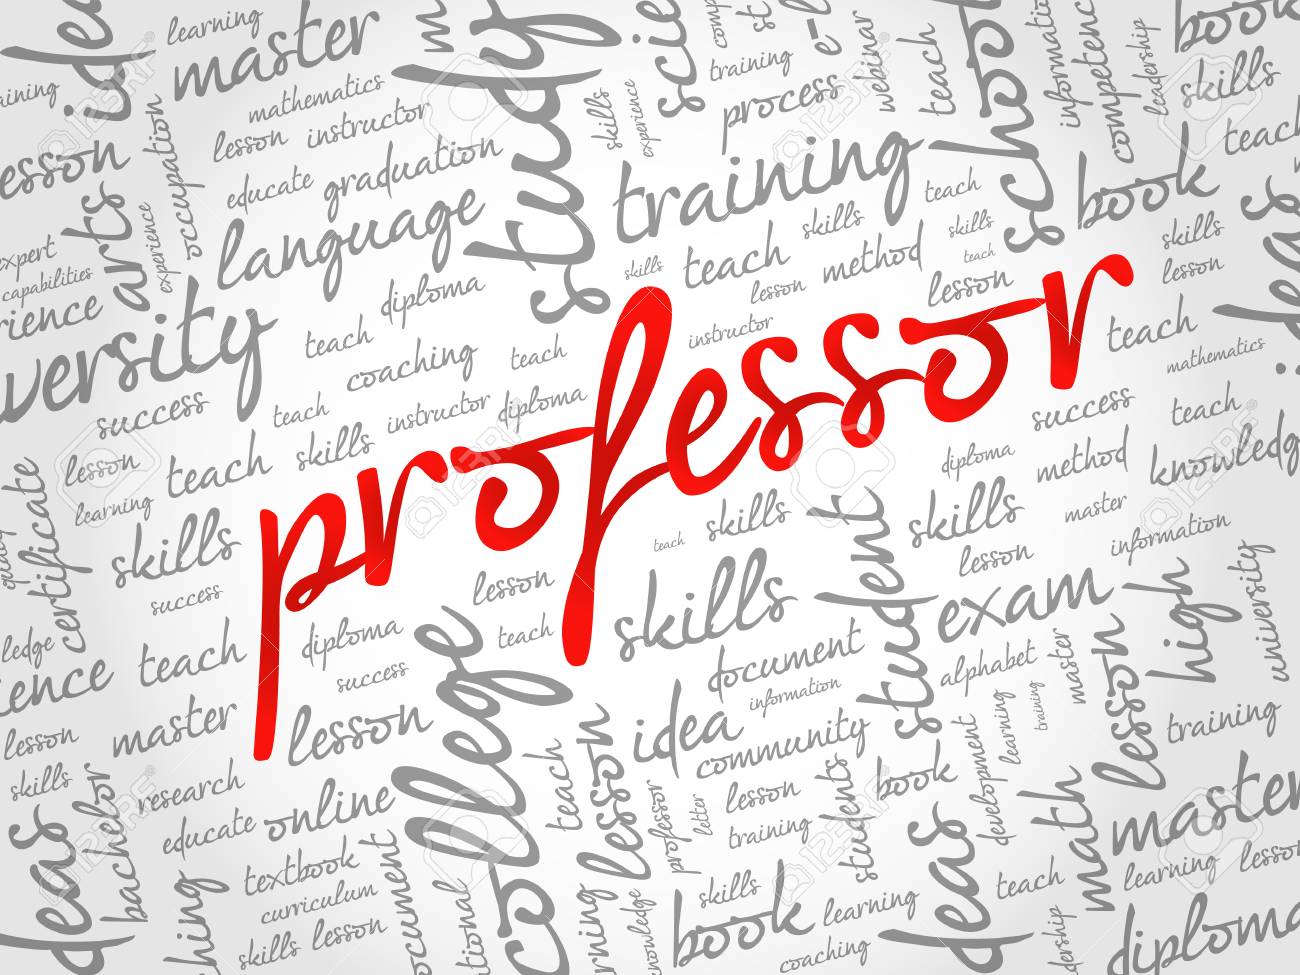 Professor Word Cloud Collage Education Concept Background Royalty